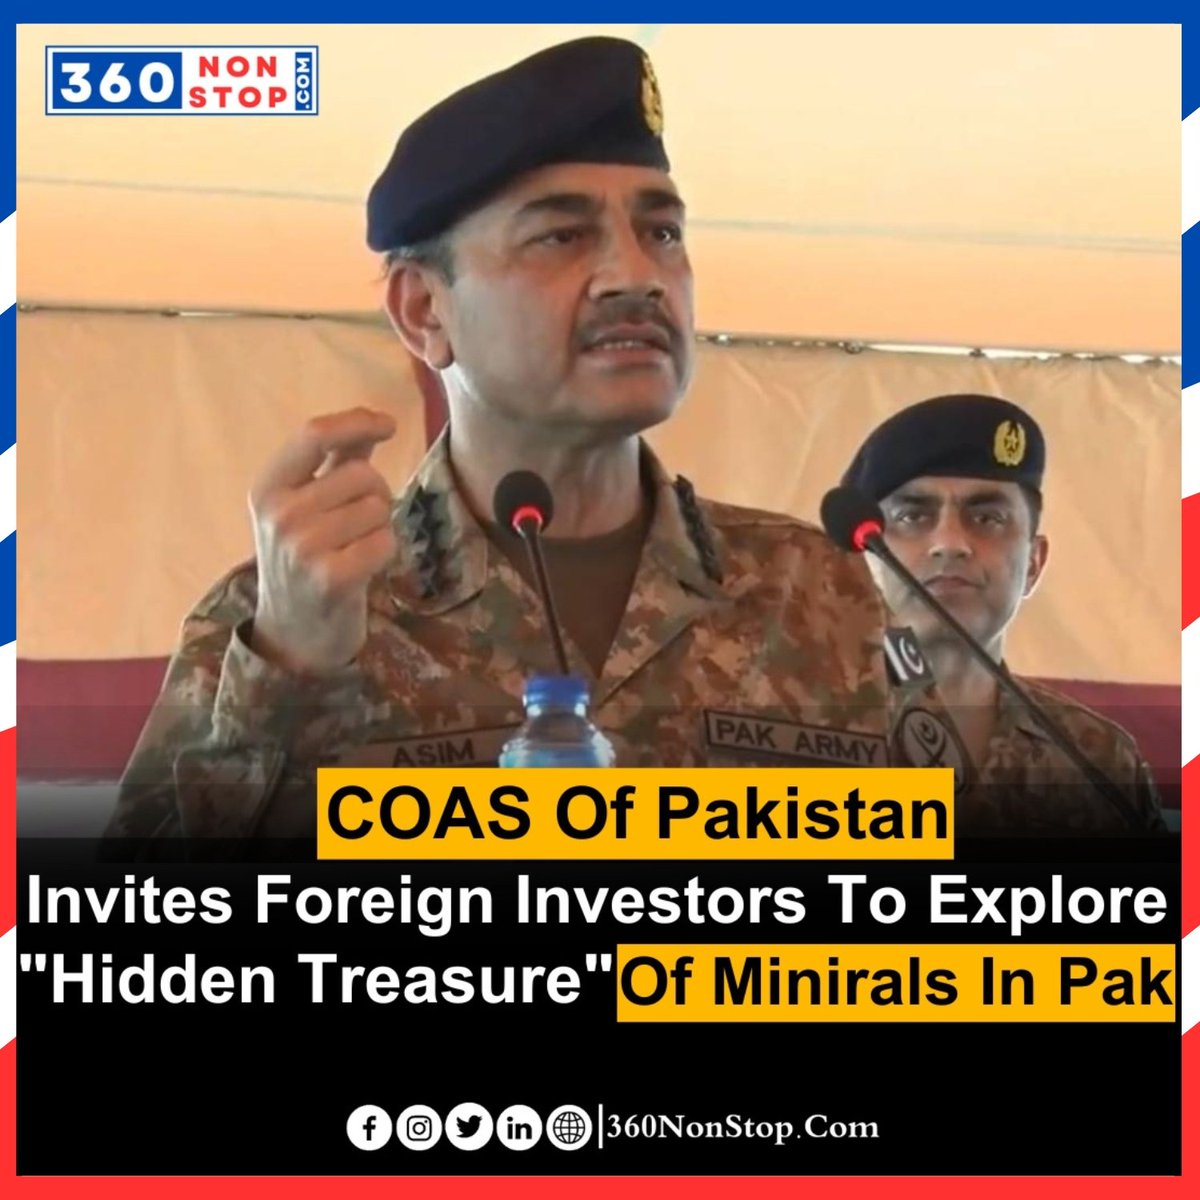 COAS (Chief Of Army Staff) OF Pakistan  Invites Foreign Investors To Explore 'Hidden Treasure ' Of Minirals  In Pakistan.
#COASInvitesInvestors #MineralExplorationPakistan #HiddenTreasures #InvestInPakistan #MineralResources #ForeignInvestmentOpportunities  #360Nonstop